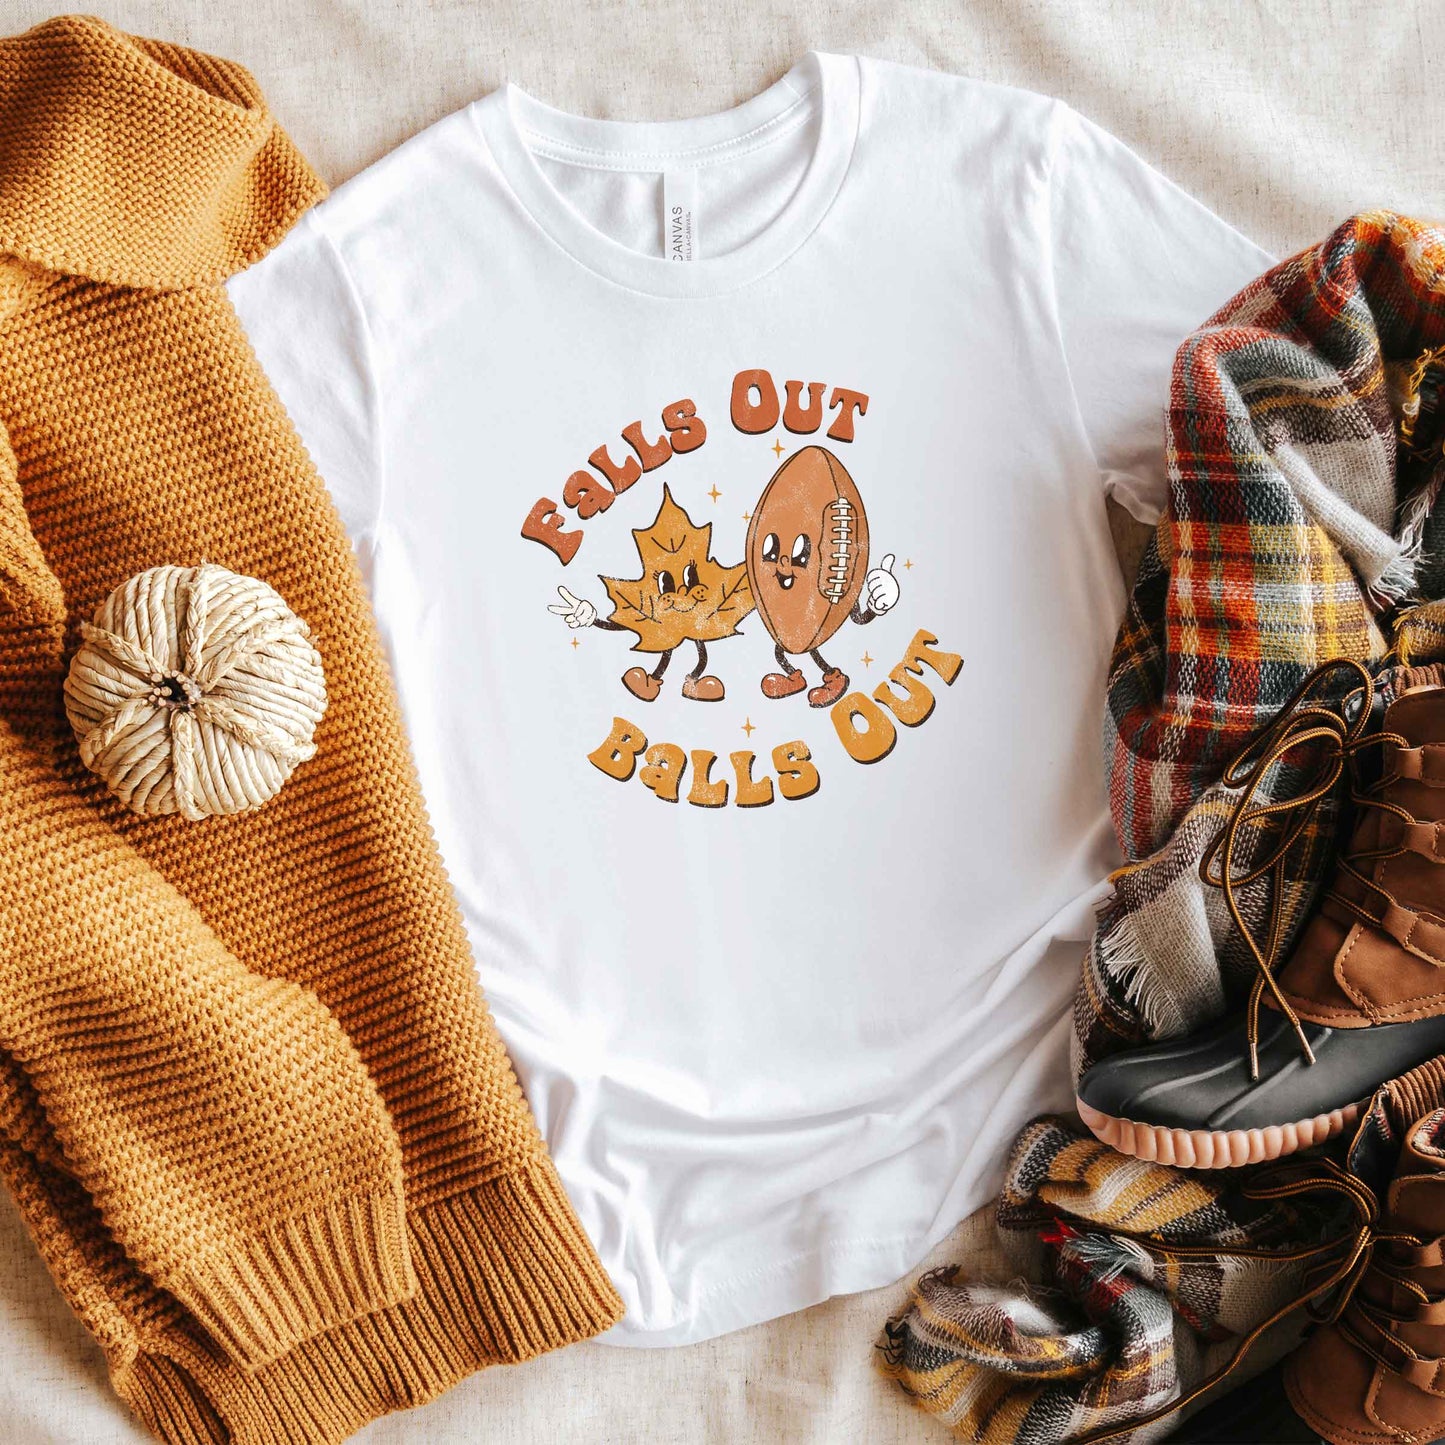 Falls Out Balls Out | Short Sleeve Crew Neck